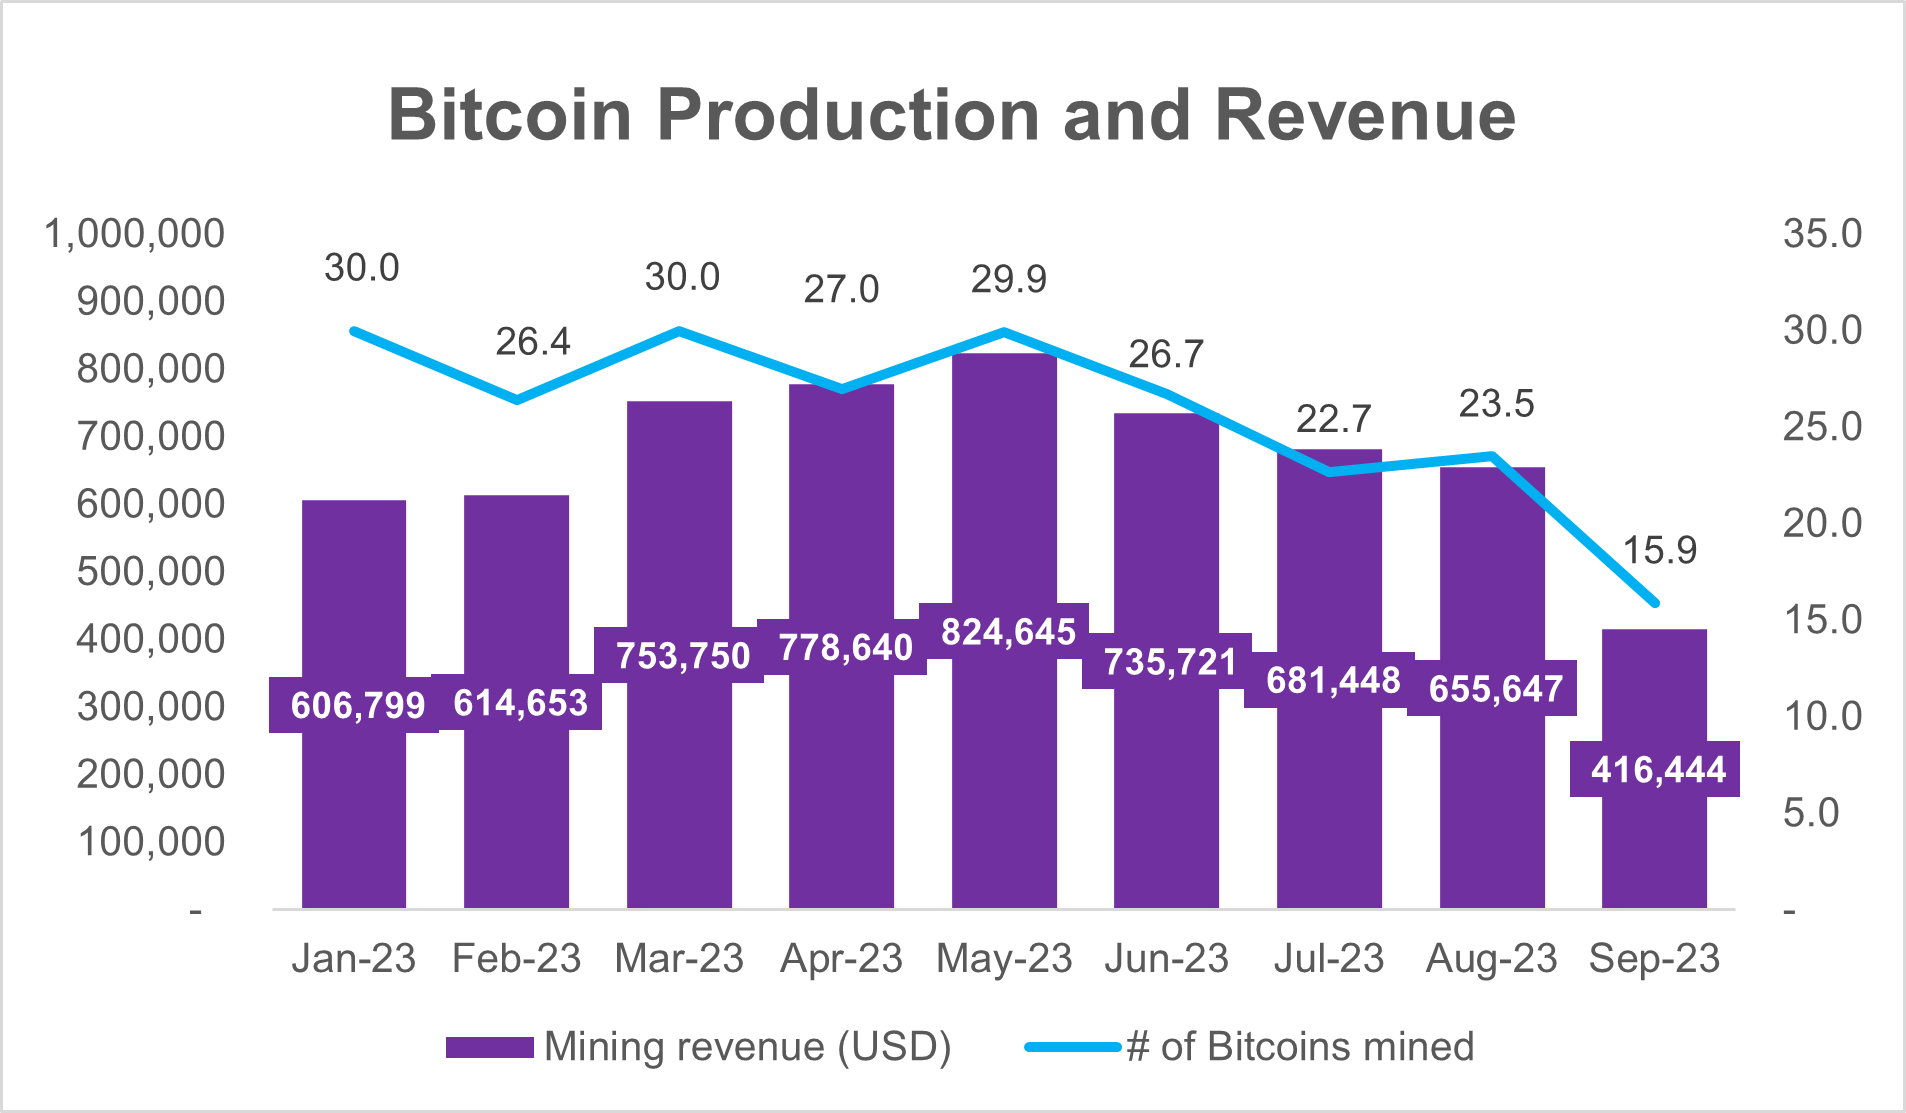 15.9 Bitcoins Mined and Revenue of US$416,444